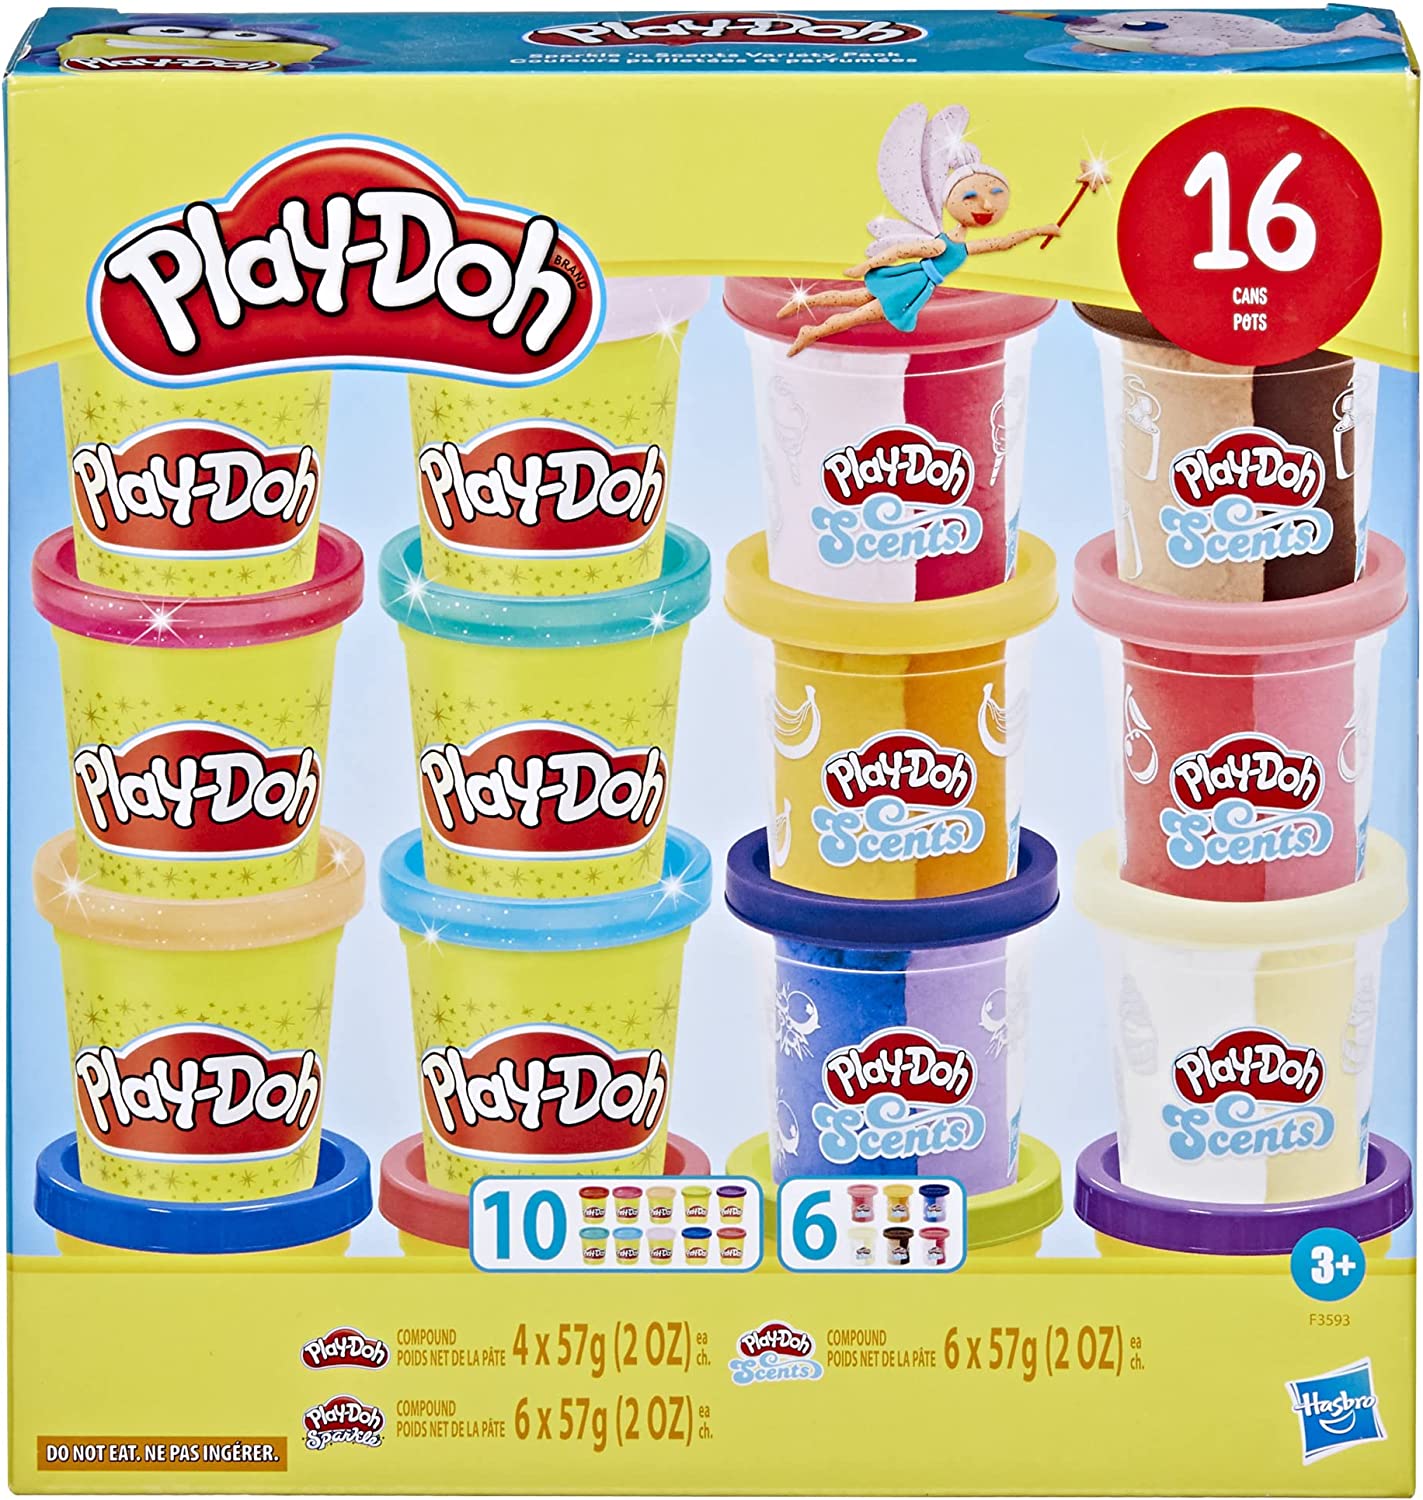 Play-doh, Brand store